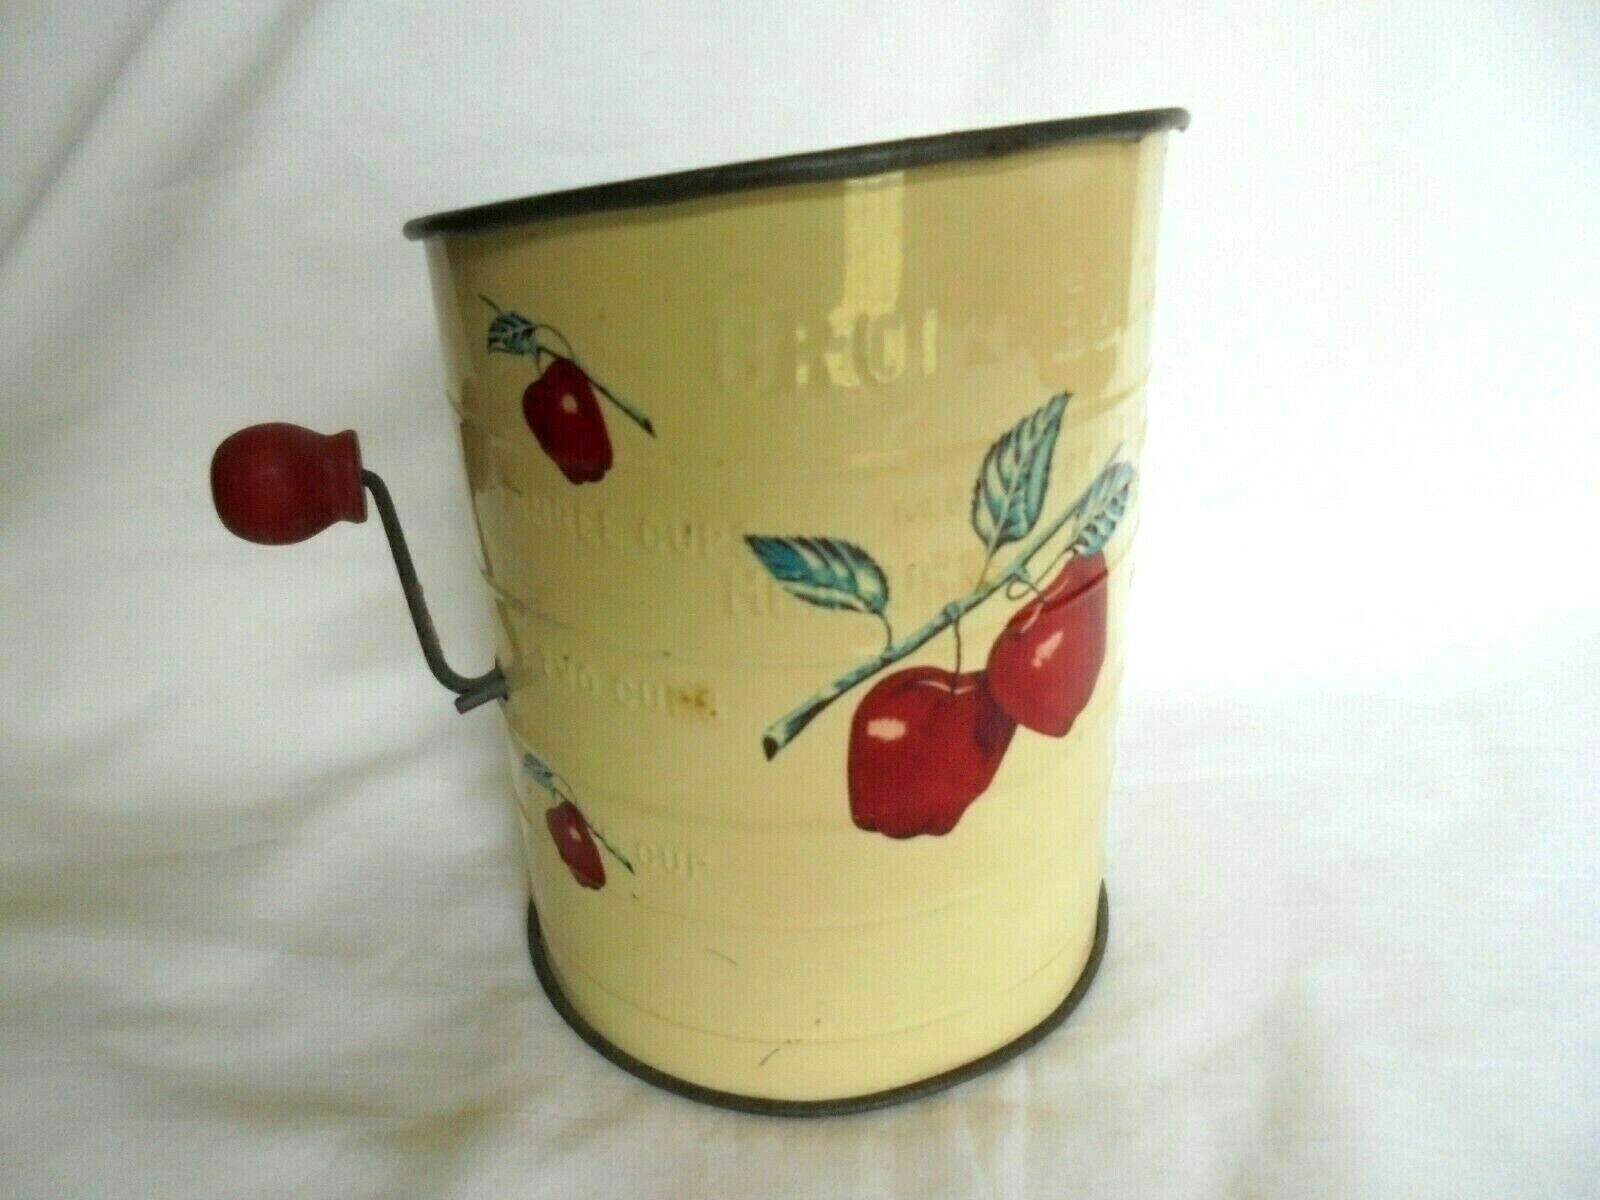 Vintage Bromwell 3 Cup Flour Sifter White W/ Red Apples & Red Wood Knob